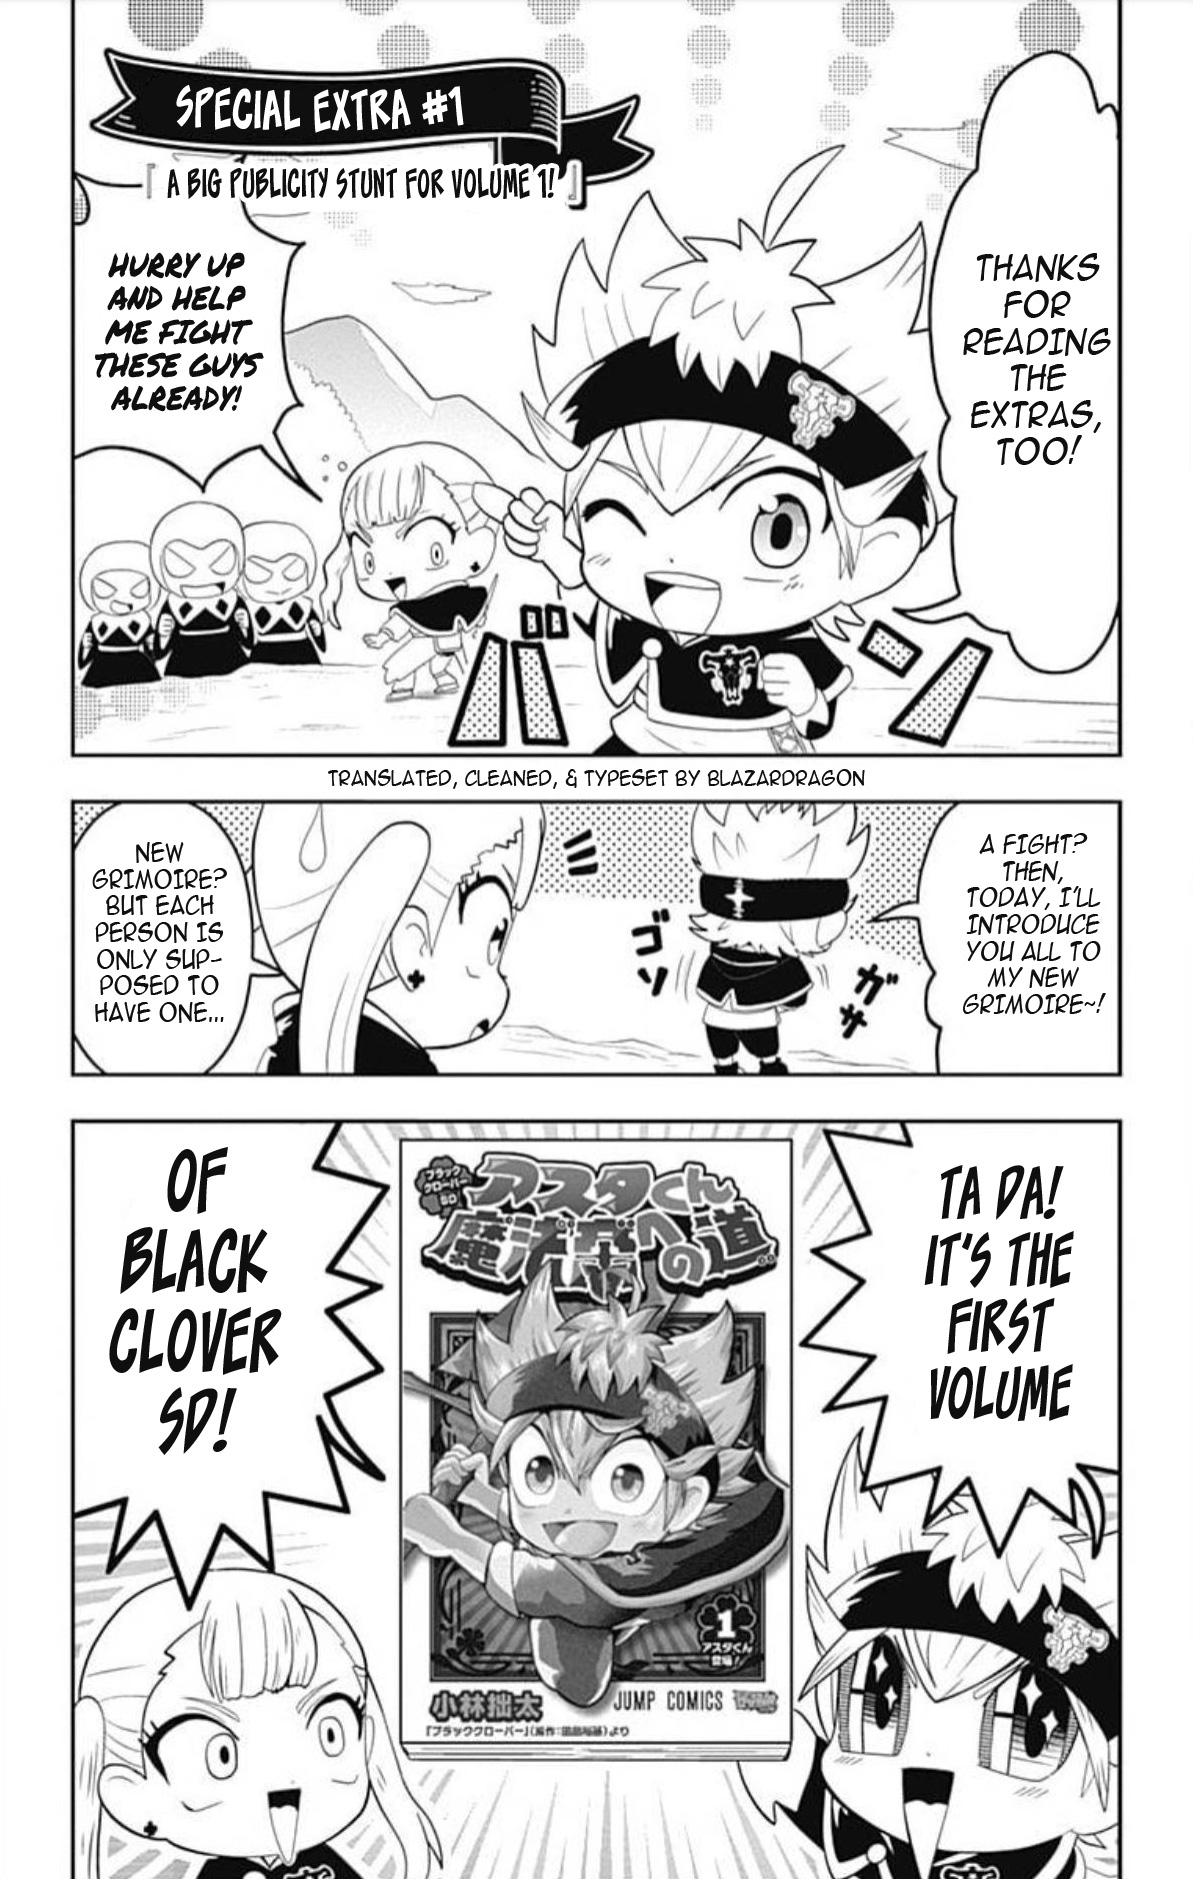 Black Clover Sd - Asta's Road To The Wizard King - Page 1